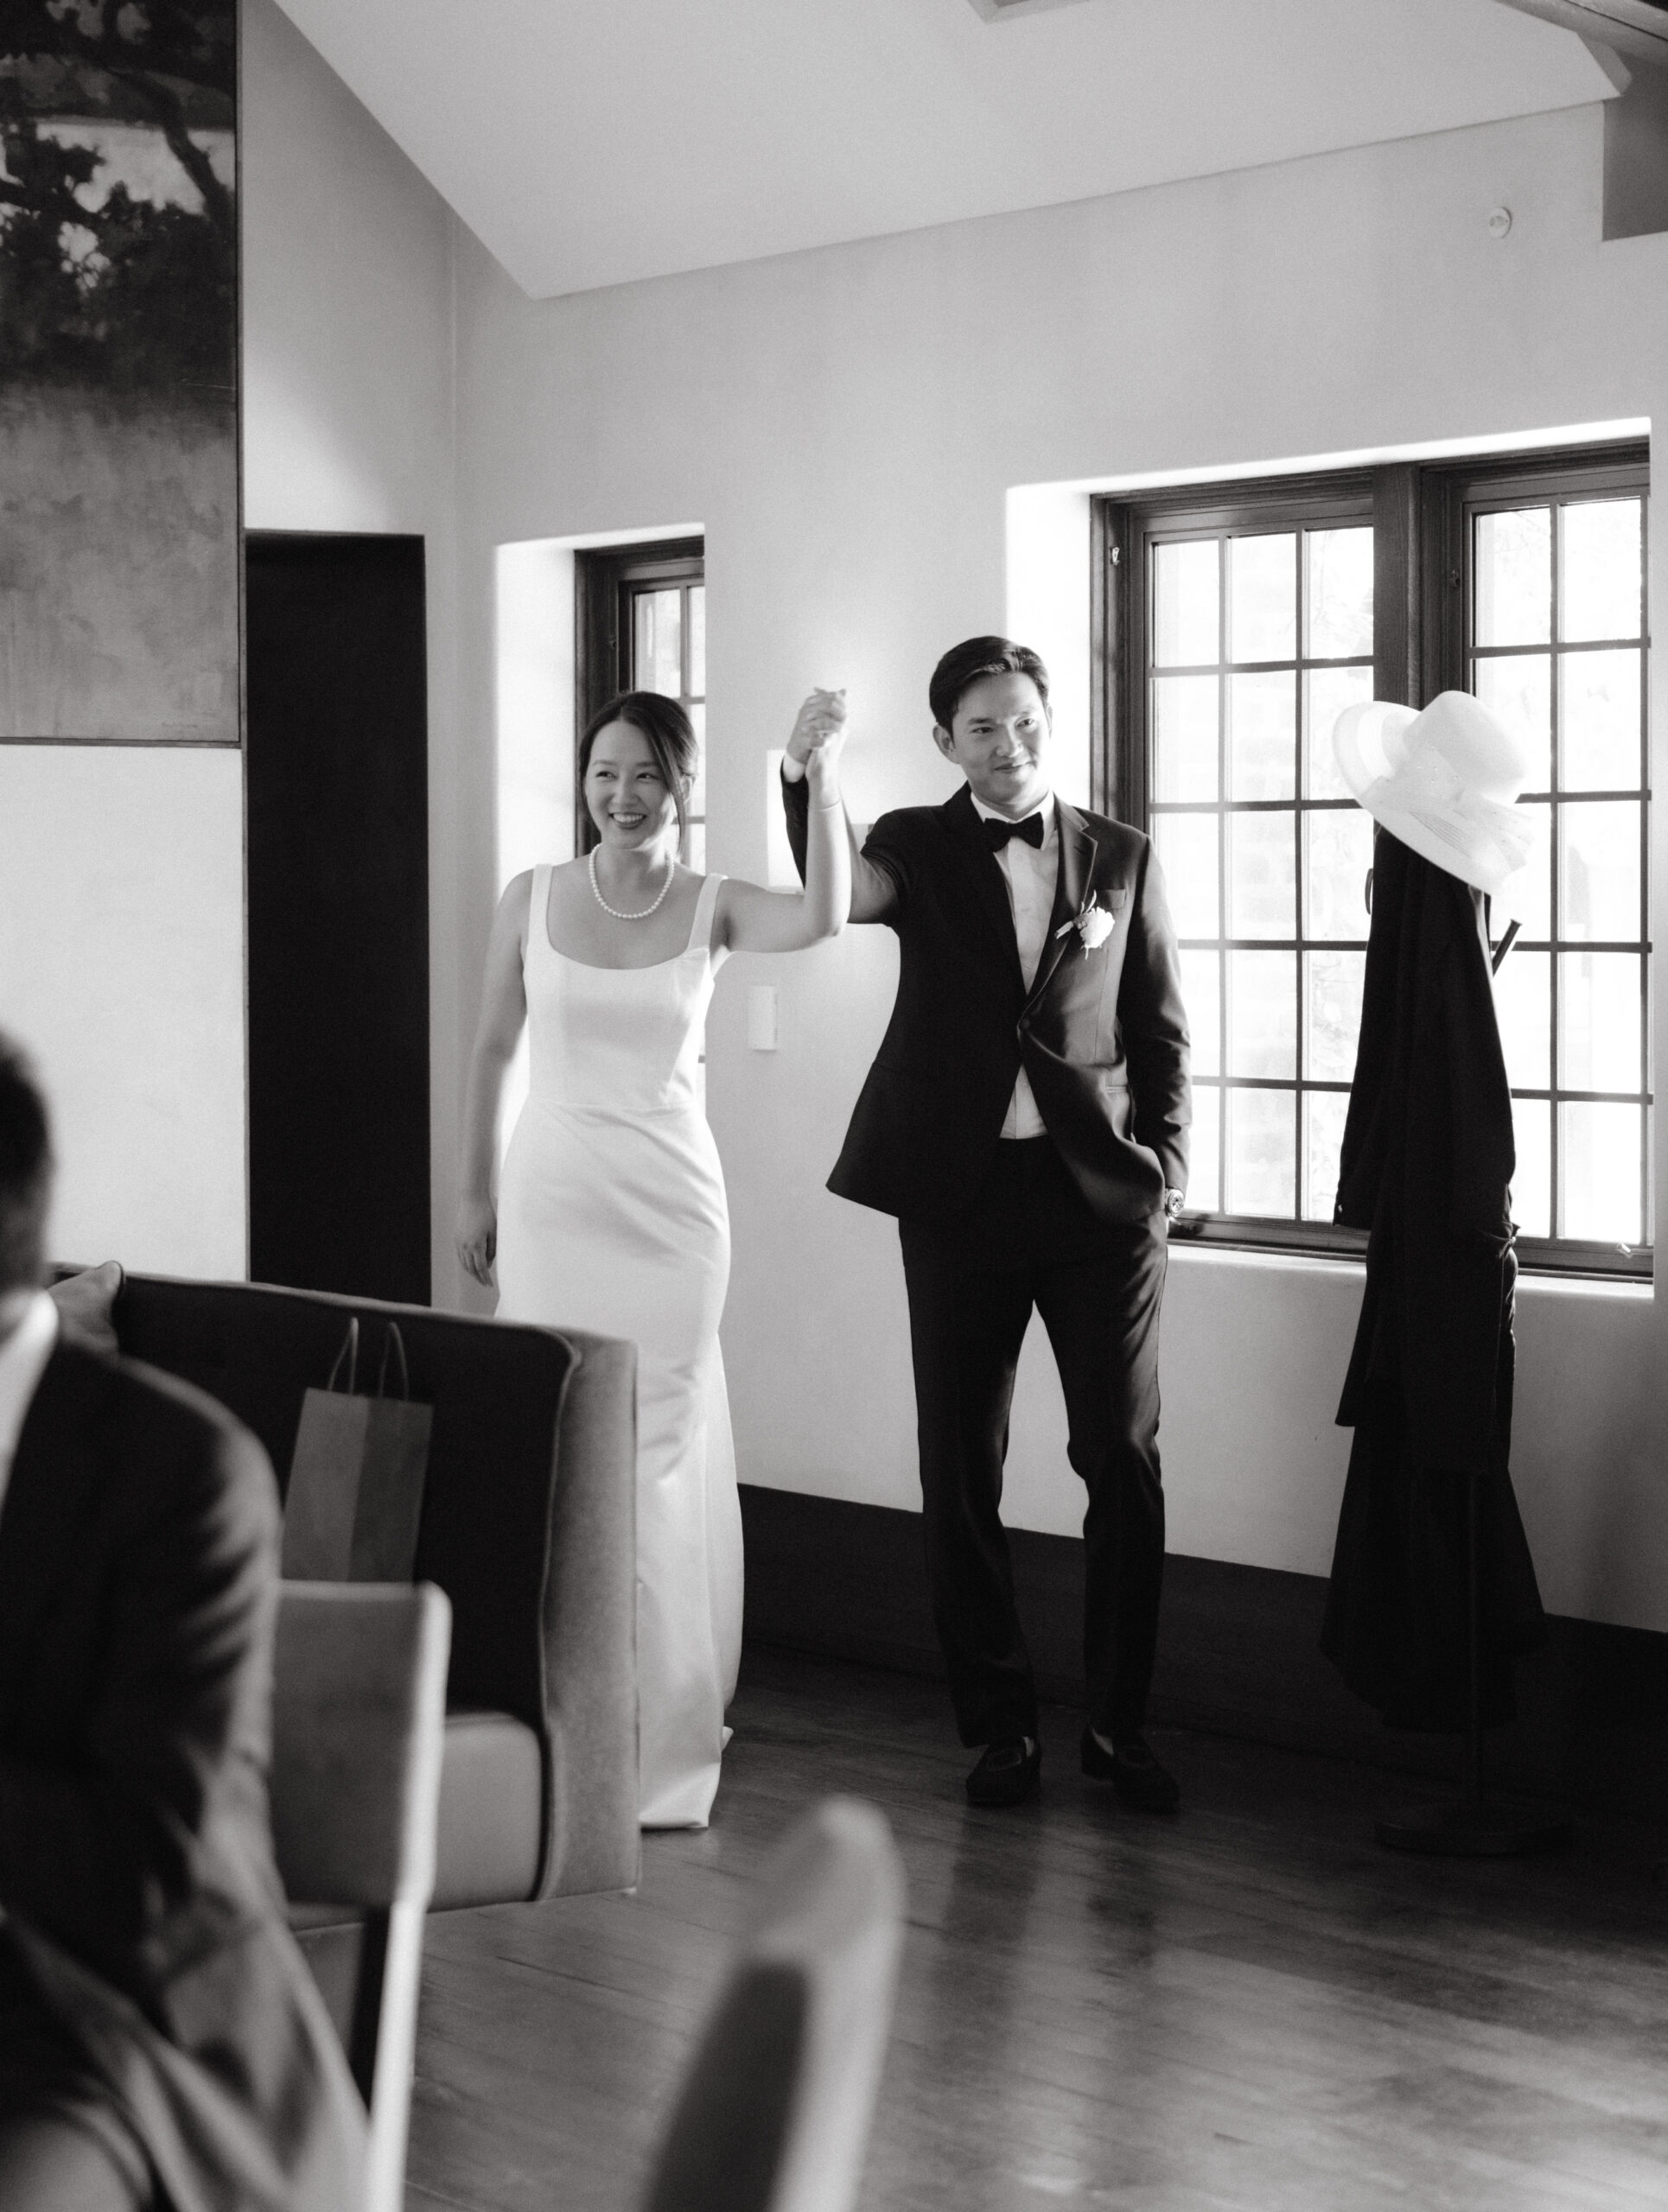 Black and white image of the newlyweds happily entering the reception area, captured by Jenny Fu Studio